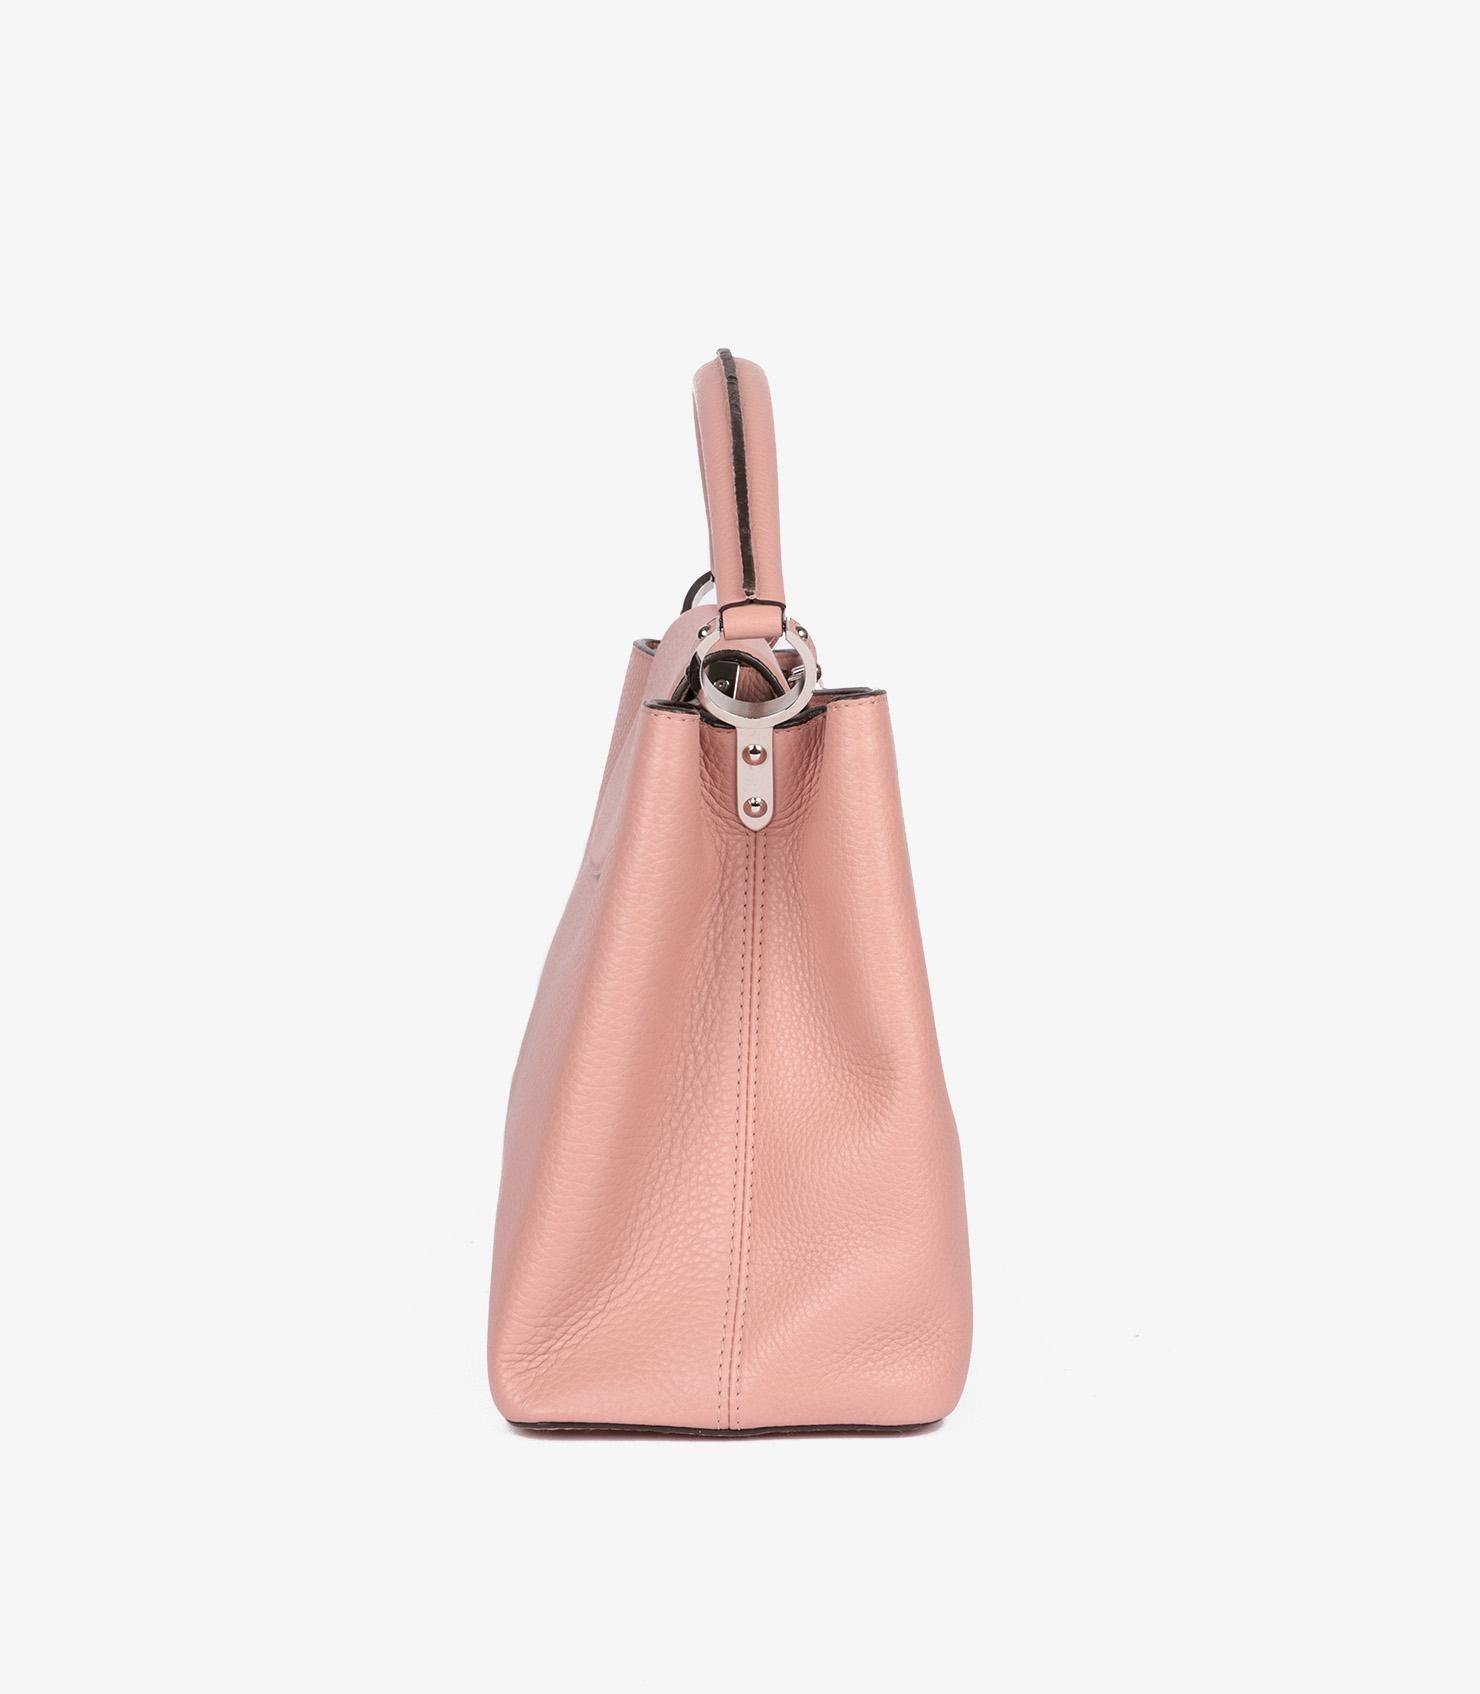 Louis Vuitton Pink Grained Calfskin Leather Capucines MM In Excellent Condition For Sale In Bishop's Stortford, Hertfordshire